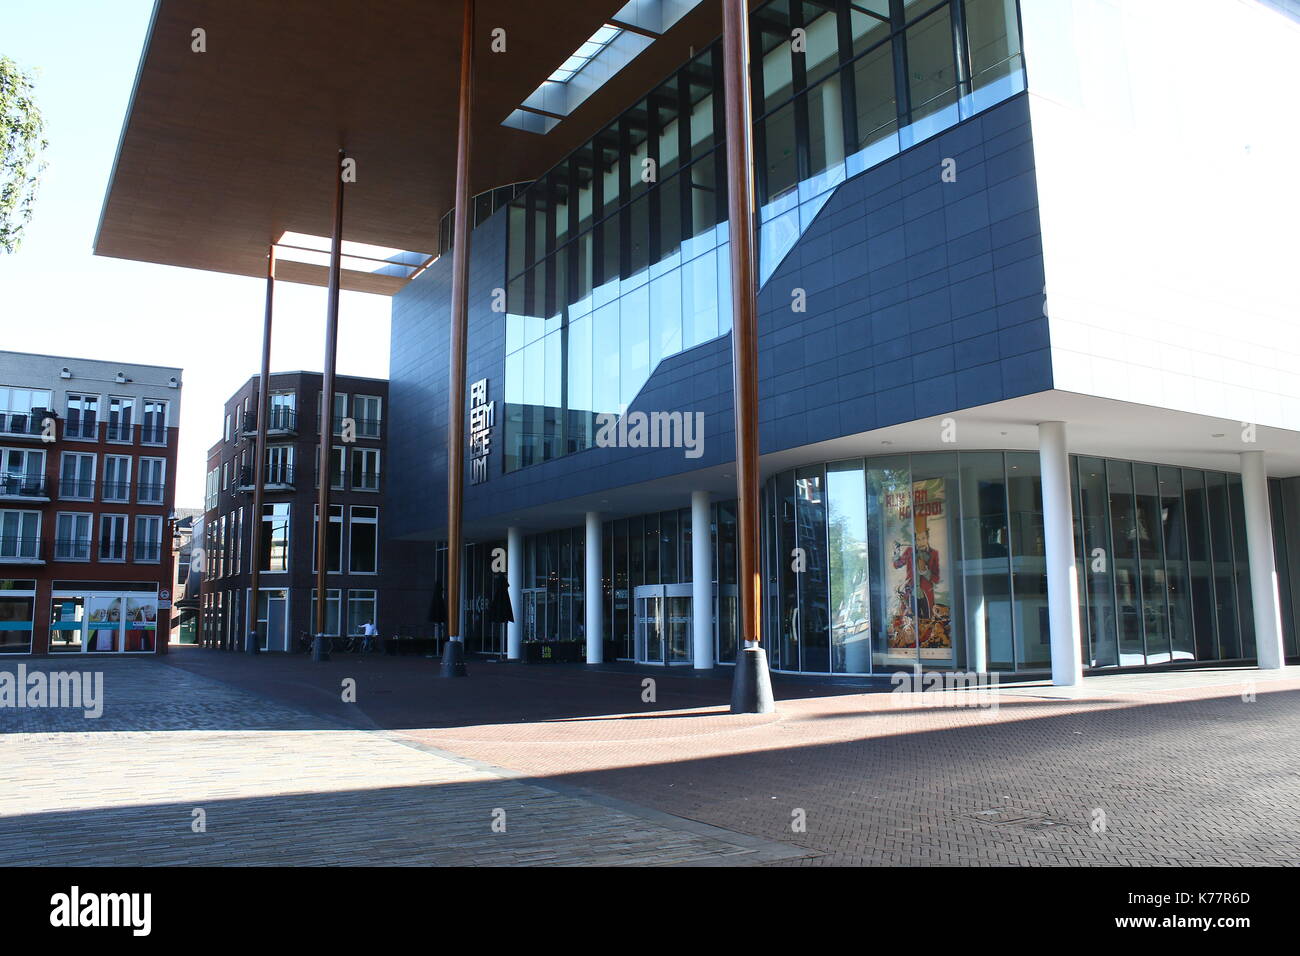 New Frisian Museum (Frysk Museum) building at Wilhelminaplein (also Zaailand) square in Leeuwarden, The Netherlands, opened in 2013. Stock Photo